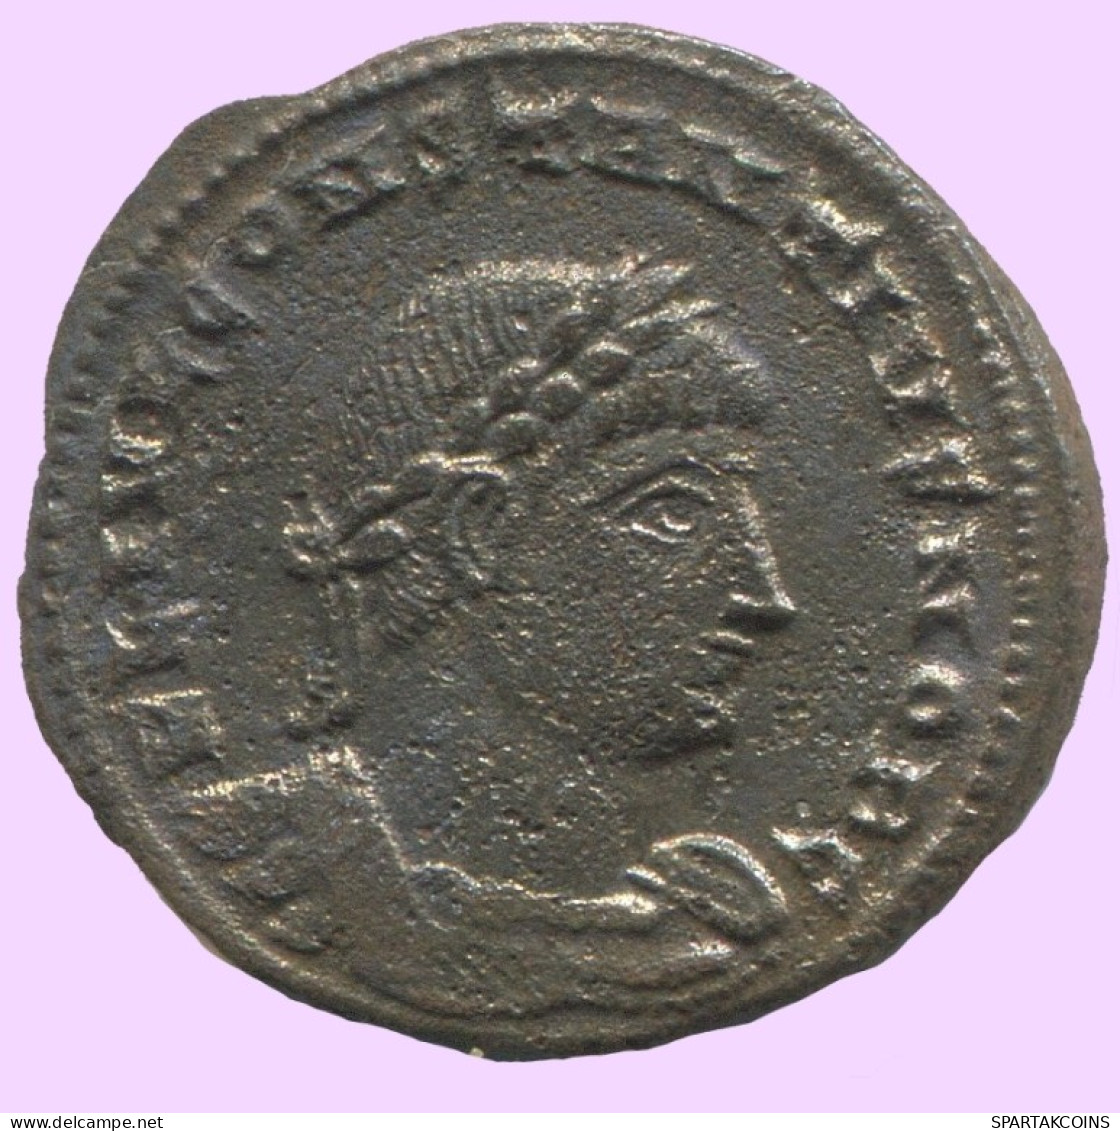 LATE ROMAN EMPIRE Pièce Antique Authentique Roman Pièce 2.2g/18mm #ANT2249.14.F.A - The End Of Empire (363 AD To 476 AD)